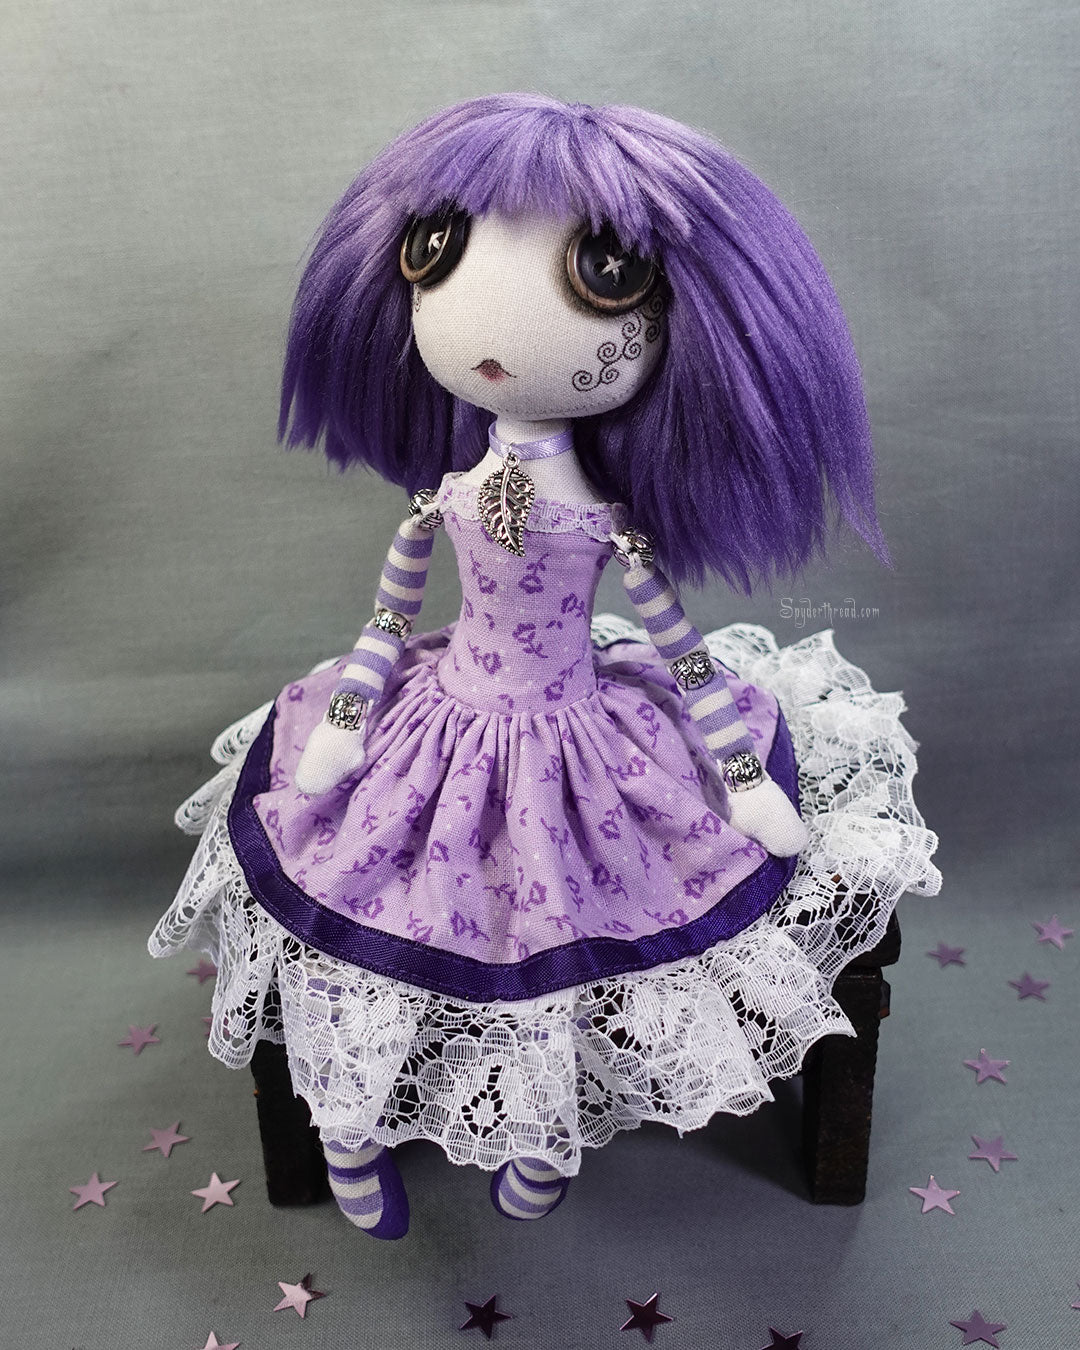 a button eyed cloth art doll with purple hair and dress